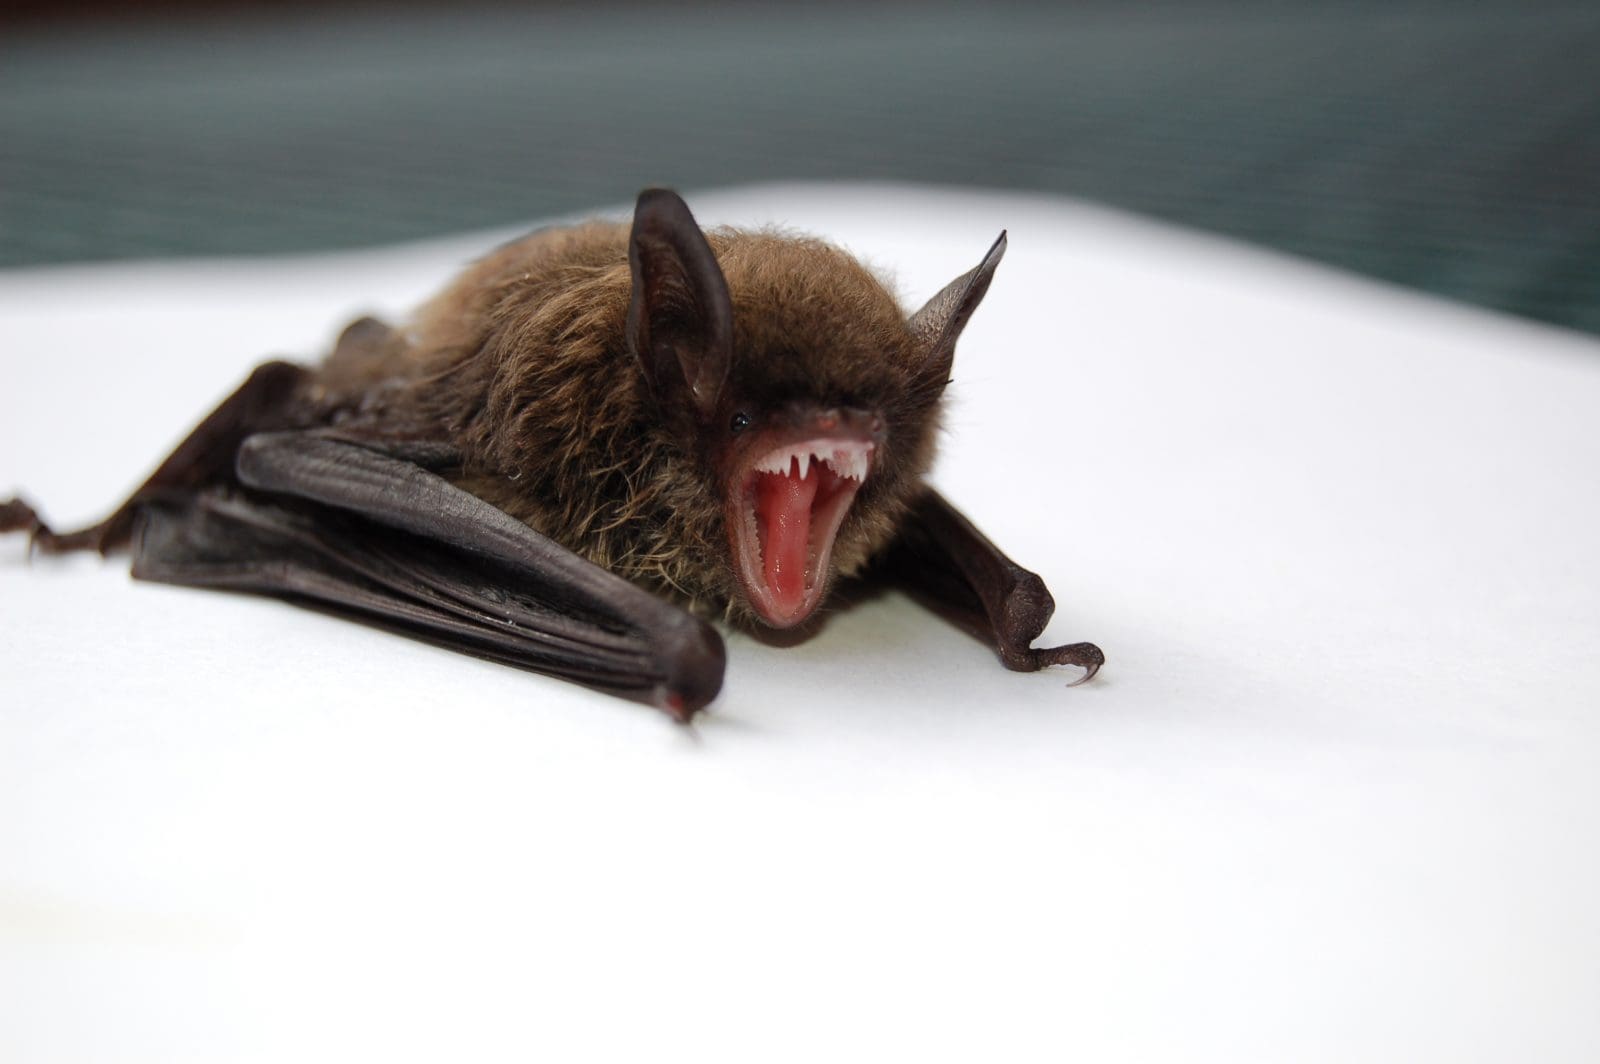 Bats are the reservoir for Nipah Virus